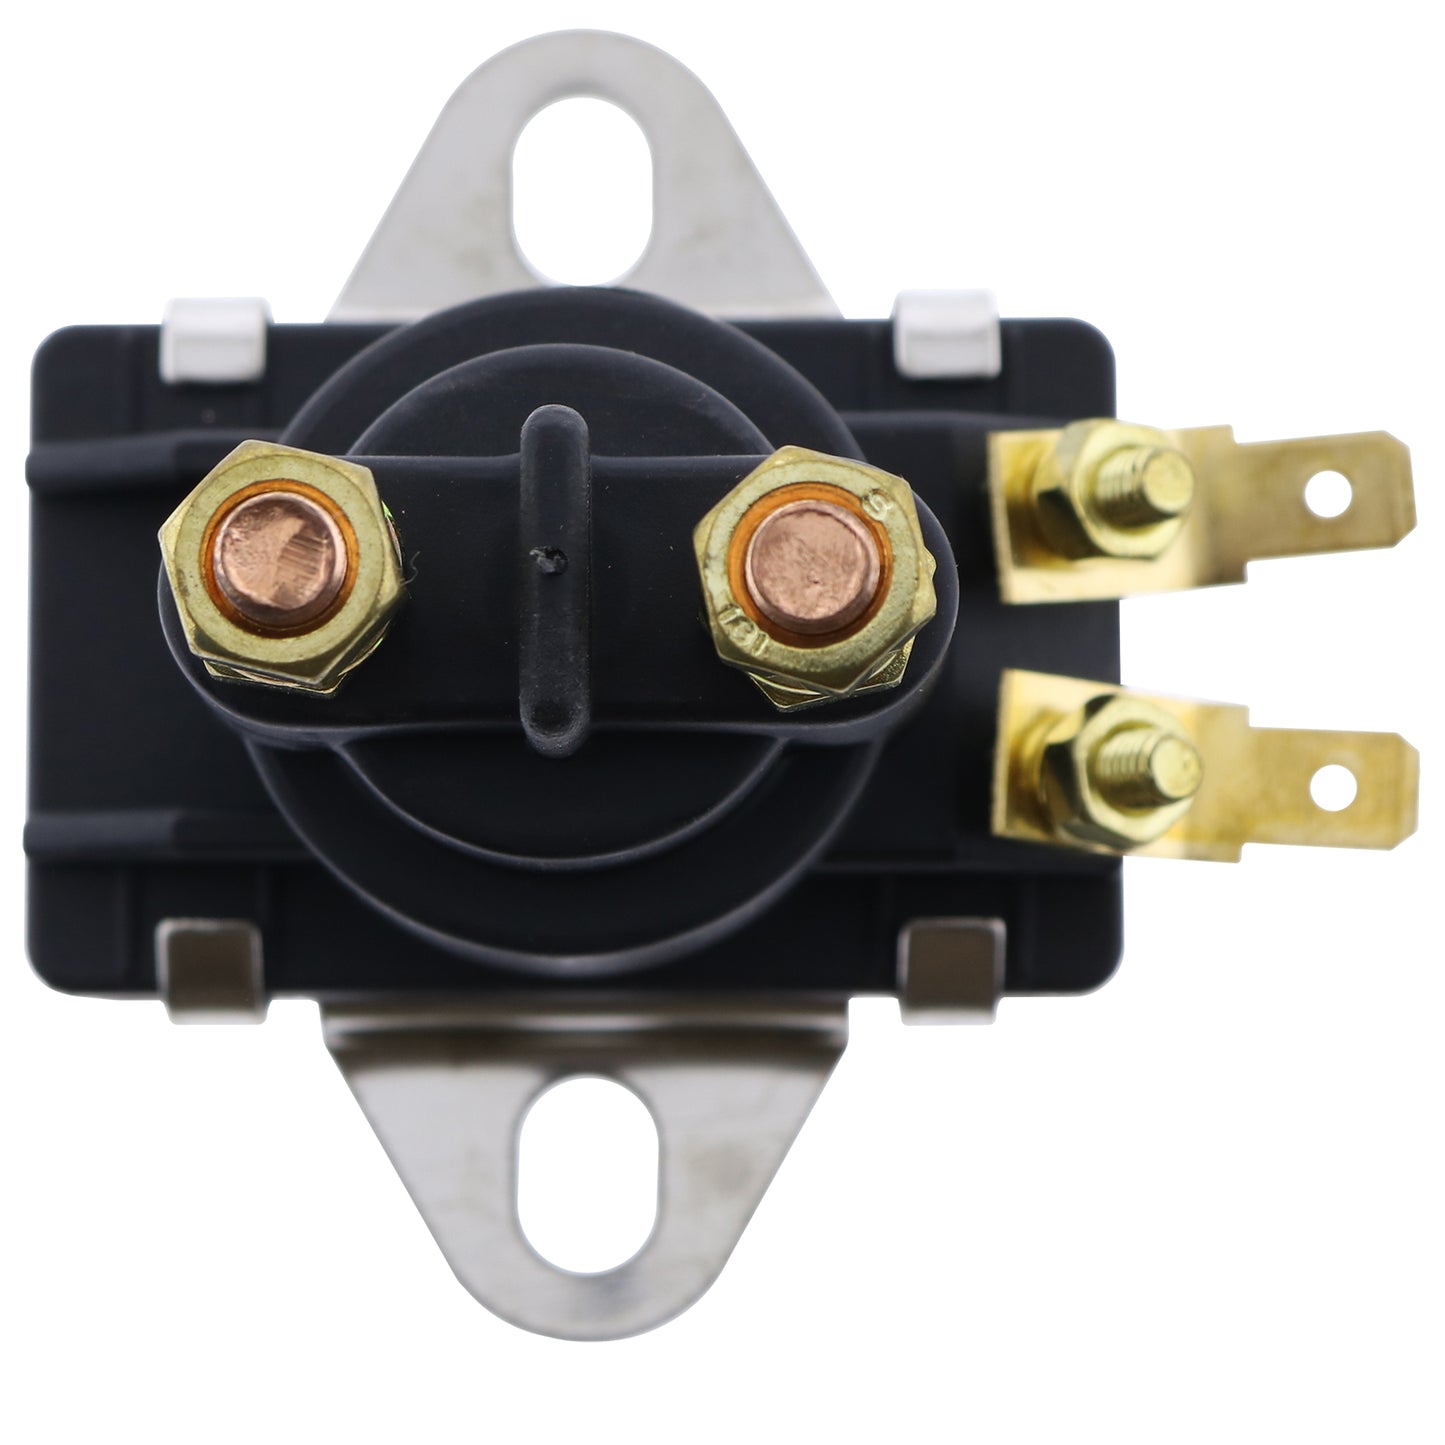 New Power Trim Solenoid Switch 96158T Compatible with Mercury Mariner Outboard Motors 35-275 HP 89-818864T 89-846070 89-94318 89-96158 89-96158T 89818864T 89846070 8994318 8996158 8996158T